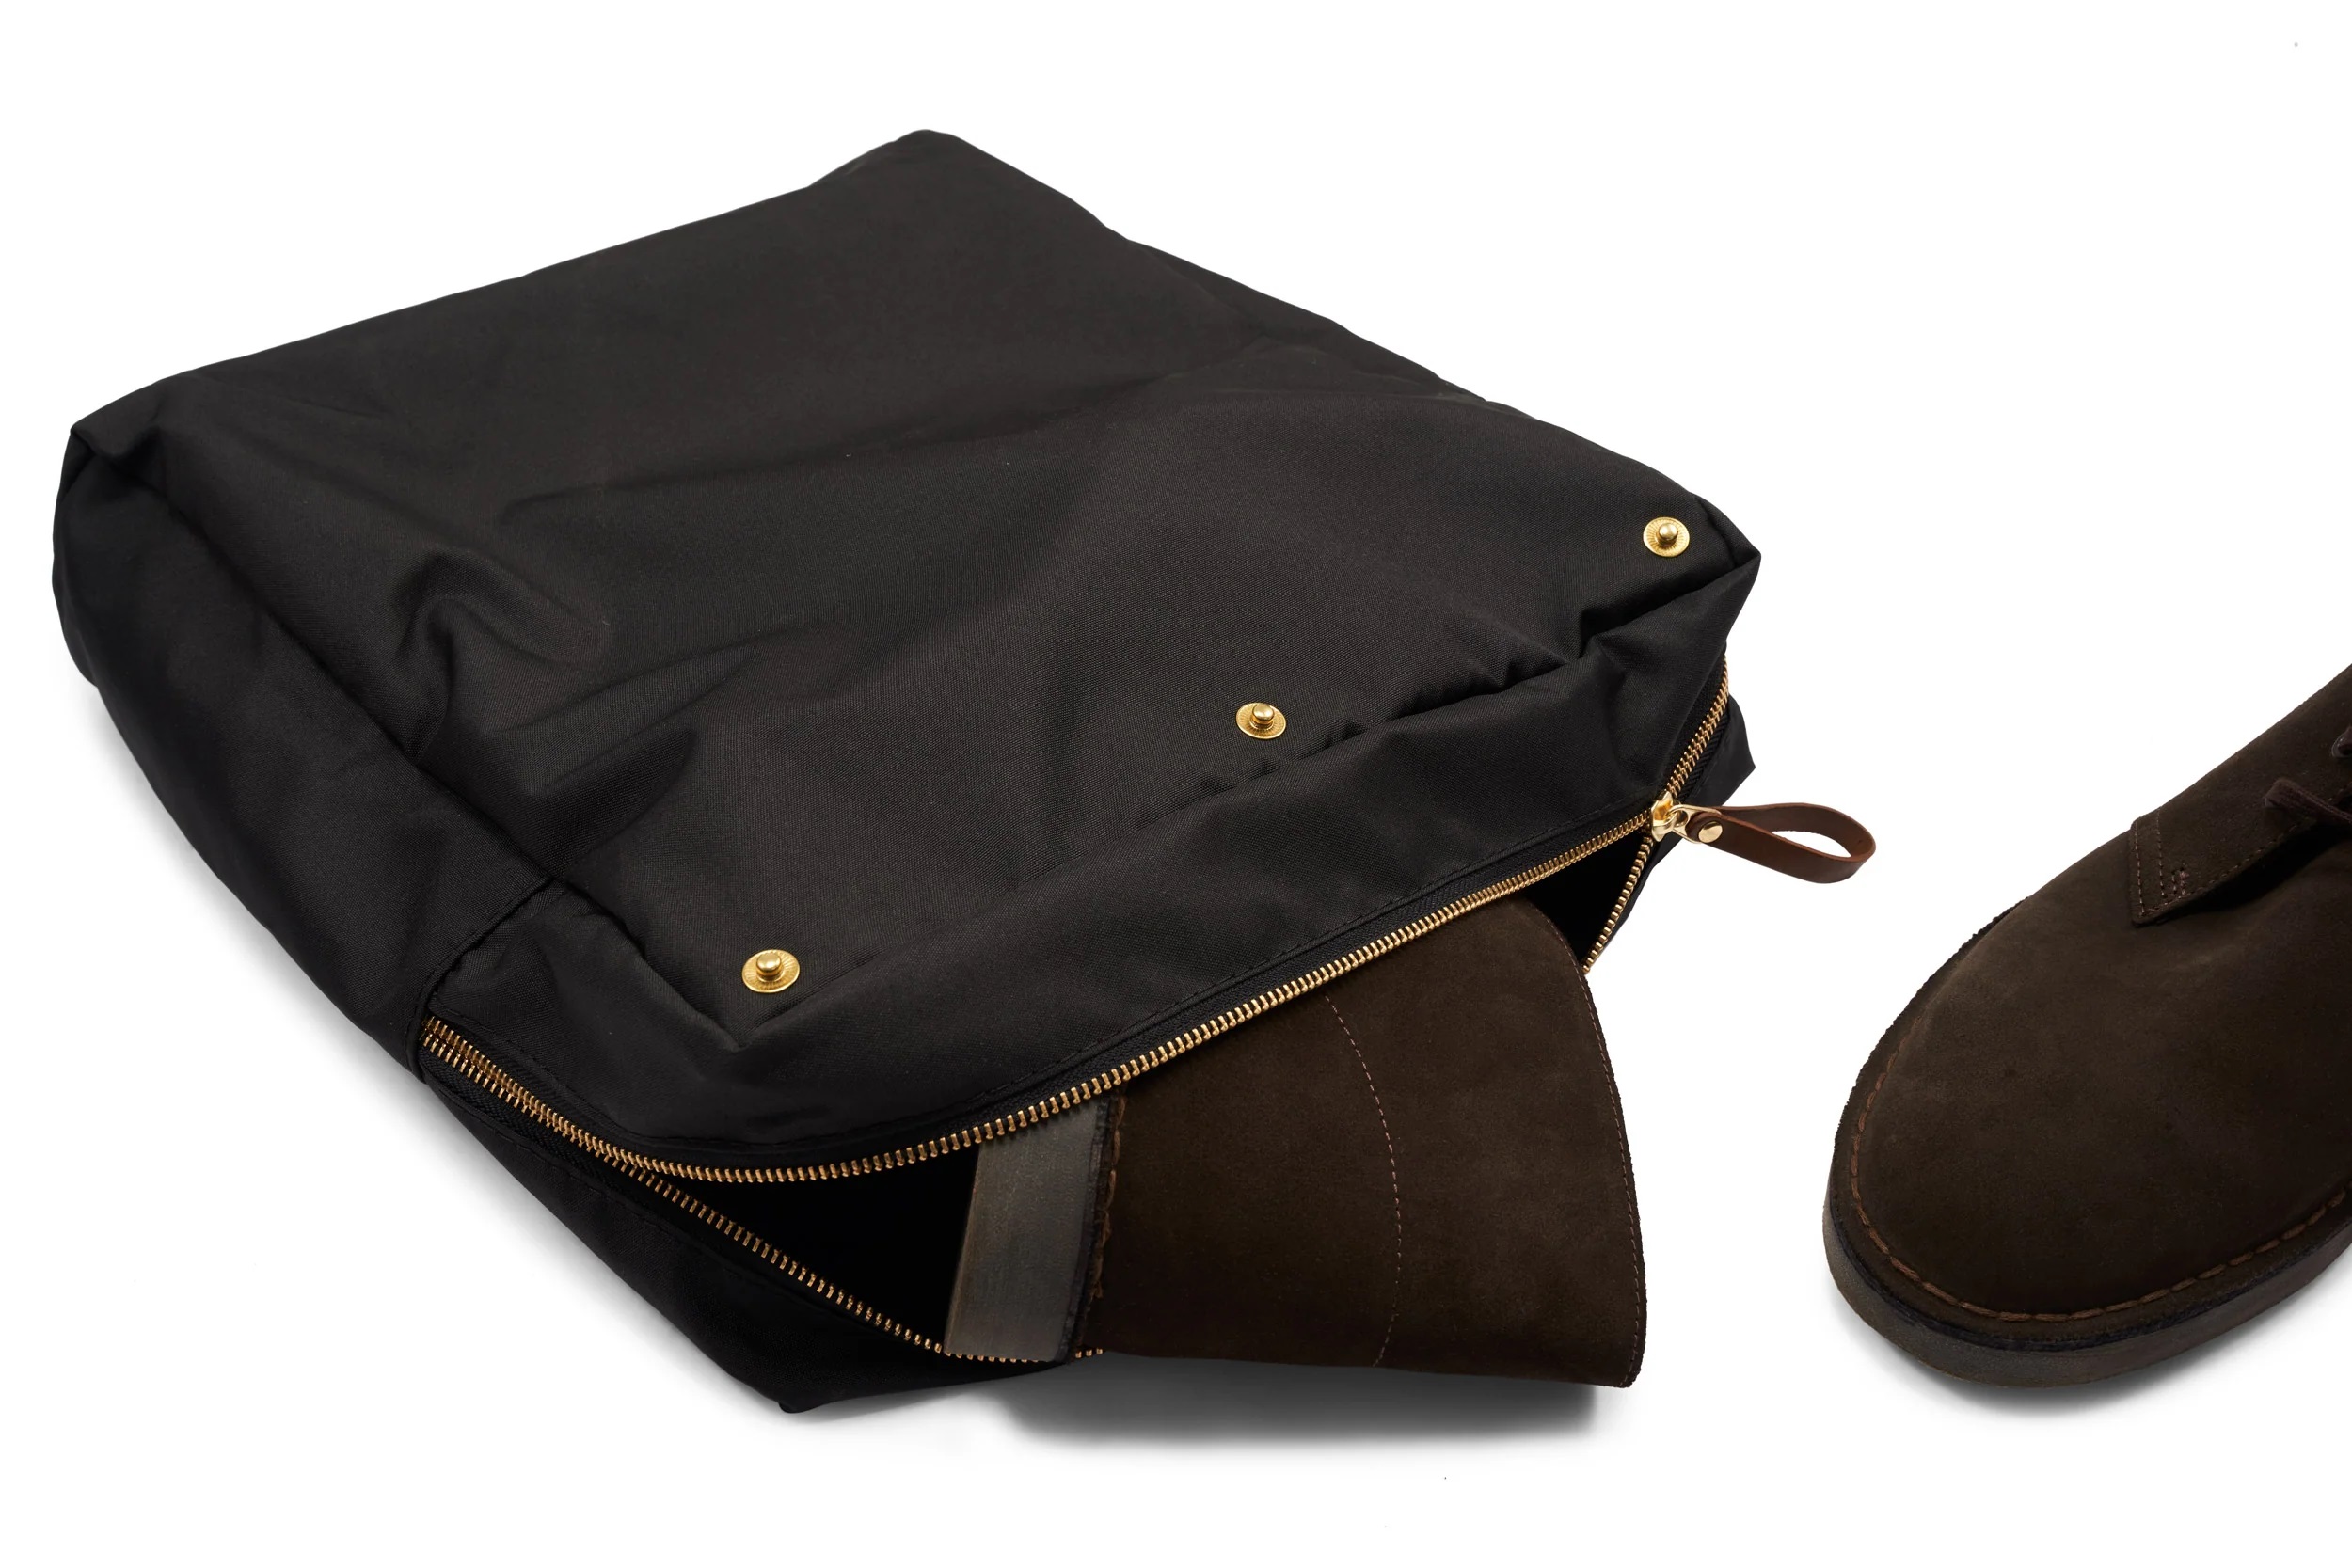 The S.C Holdall - Chocolate: Canvas Holdall Bag